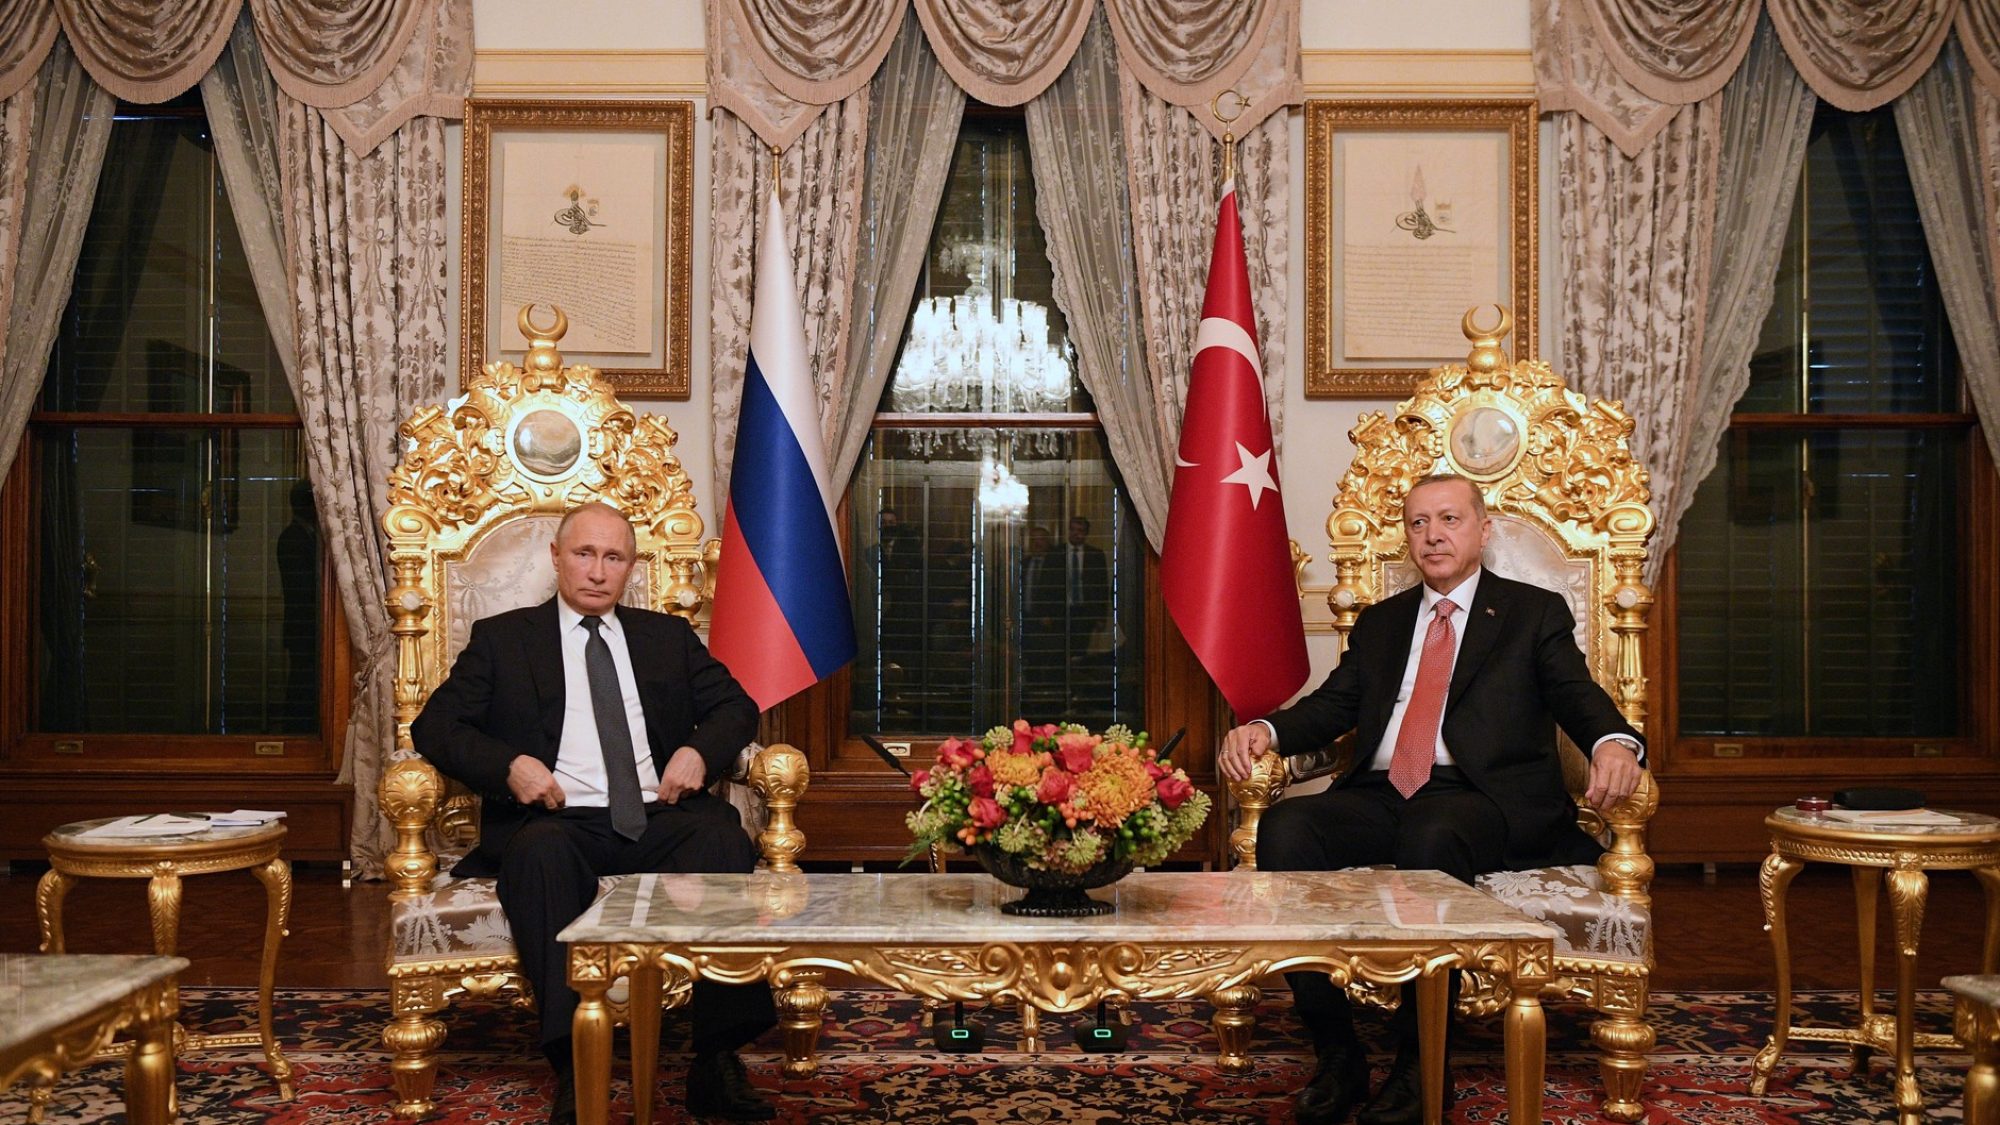 Russian President Vladimir Putin and Turkish President Recep Tayyip Erdoğan sit in a luxuriously decorated room in Istanbul